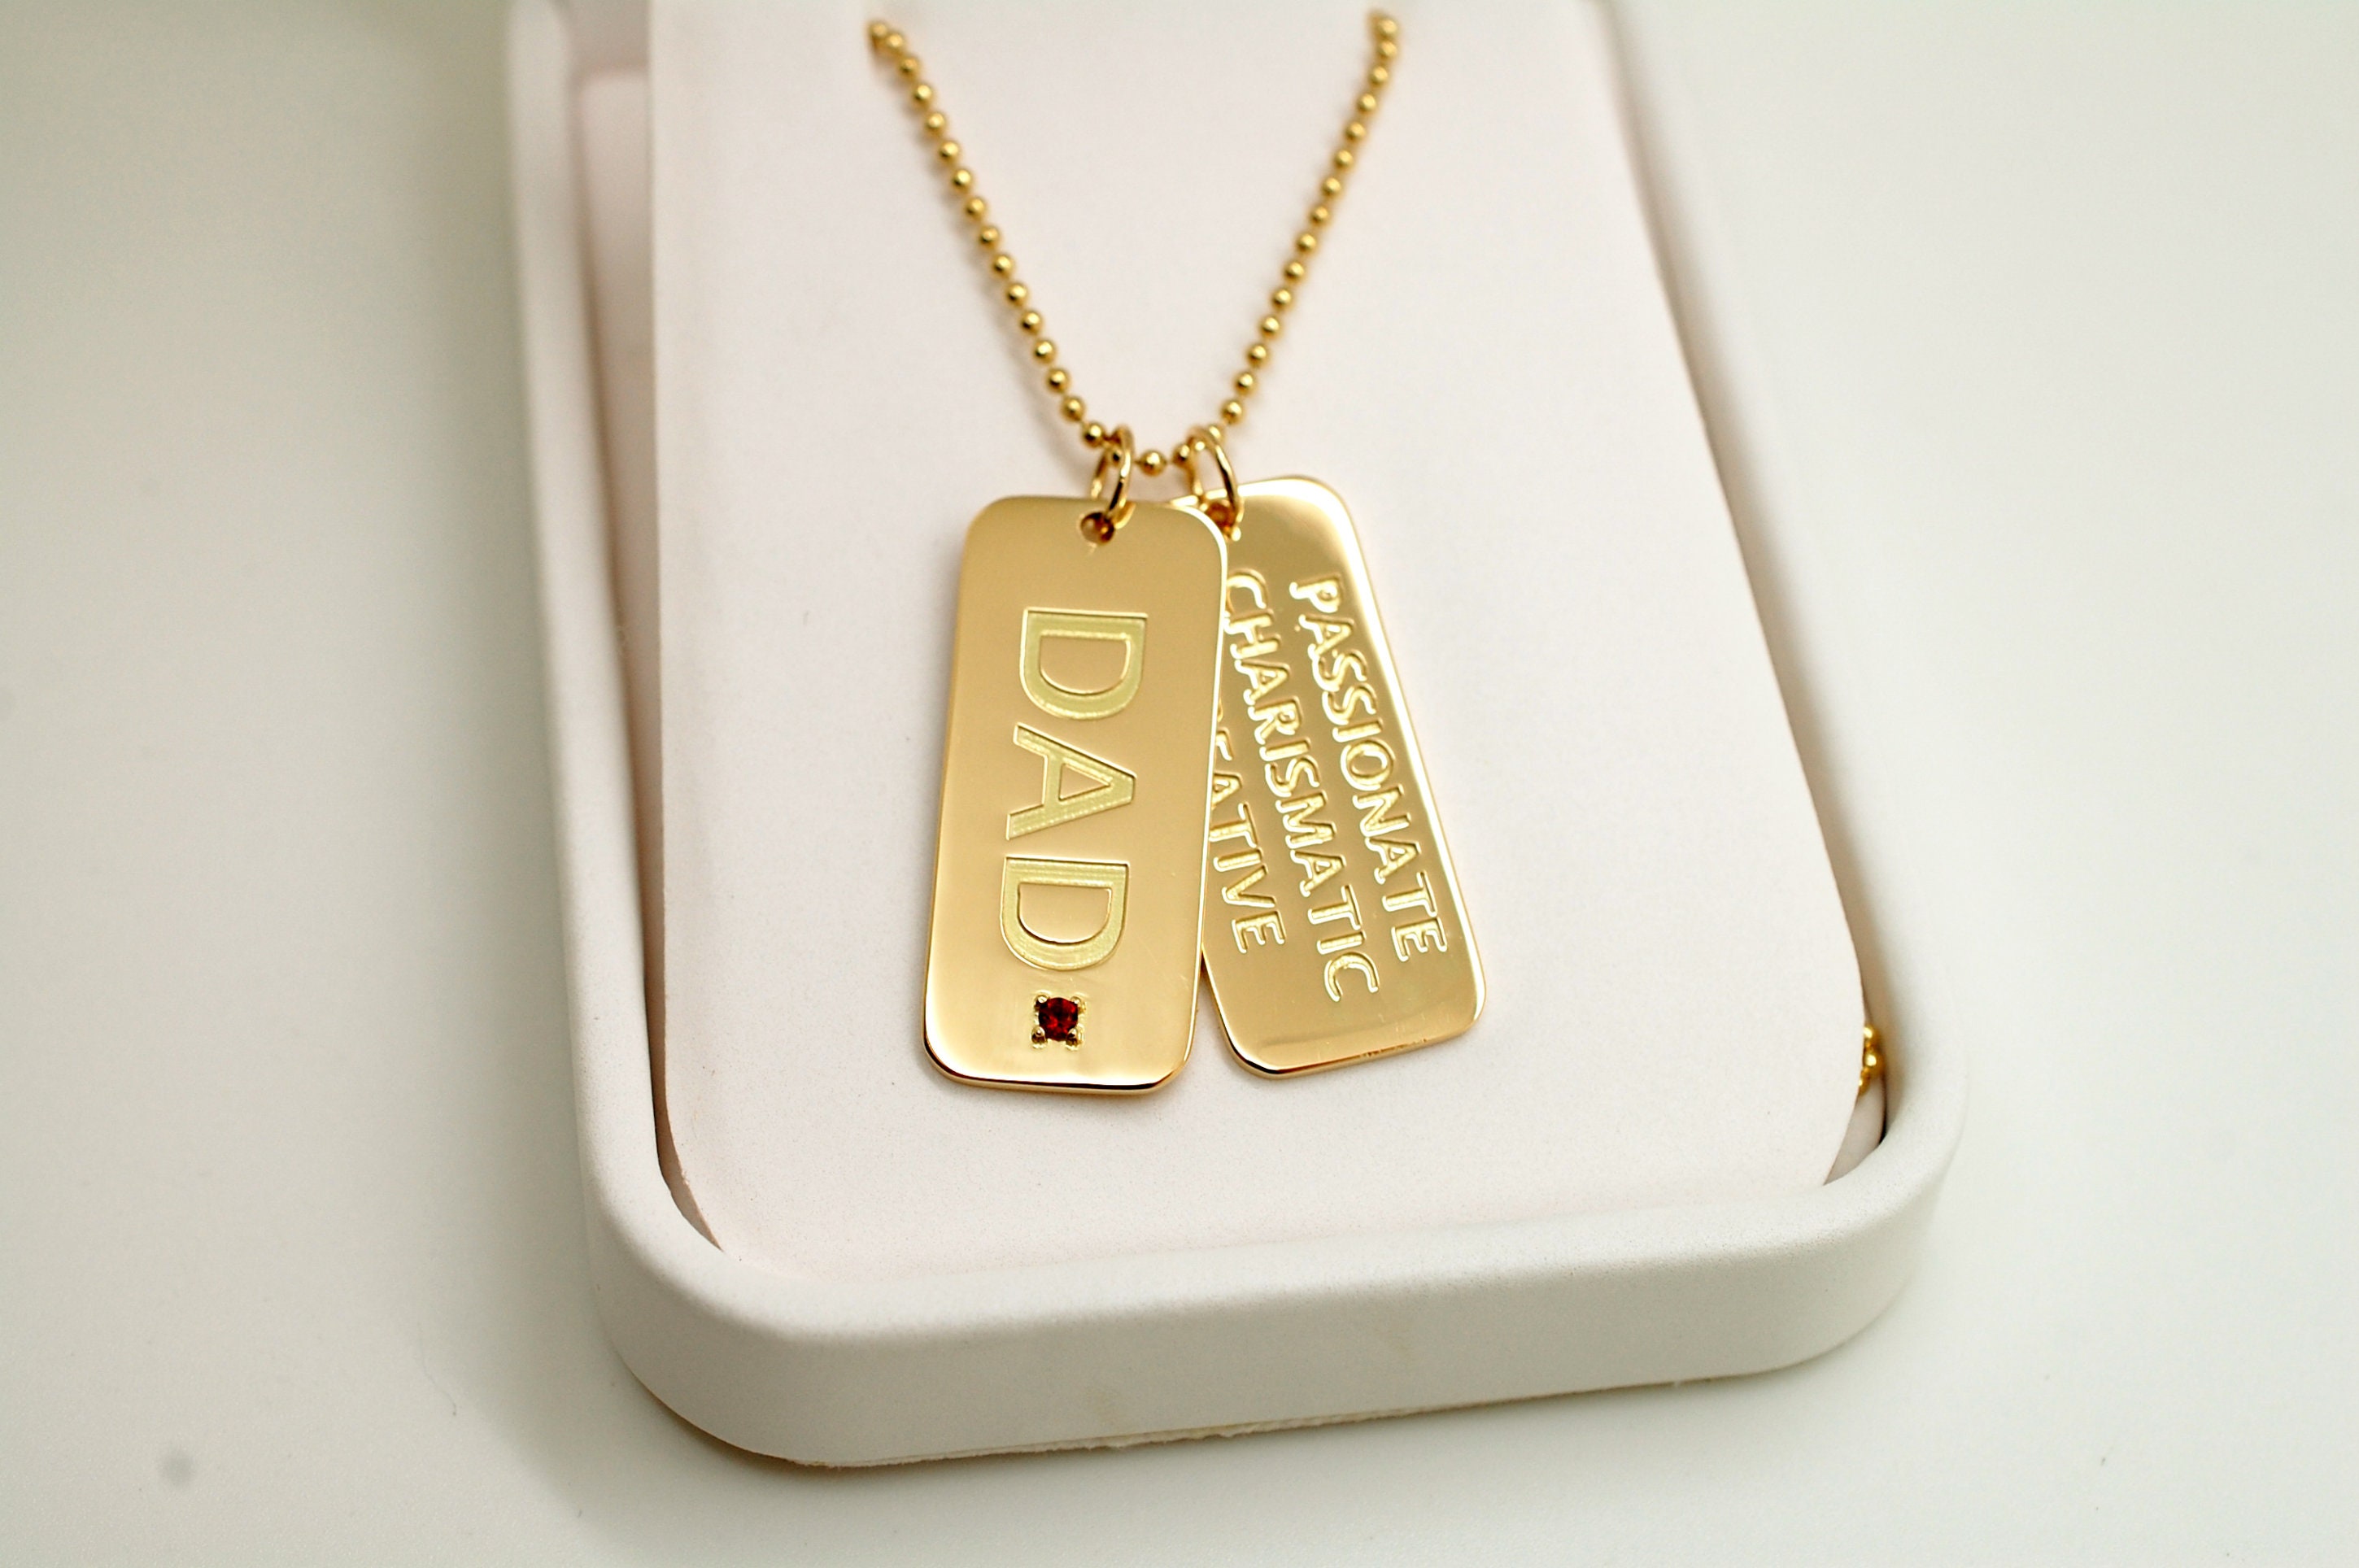 14K Solid Gold Dog Tag Custom Necklace for Men Anniversary Gift 14K Gold Mens Tag Necklace 1.25x.5in Tag 20in Necklace